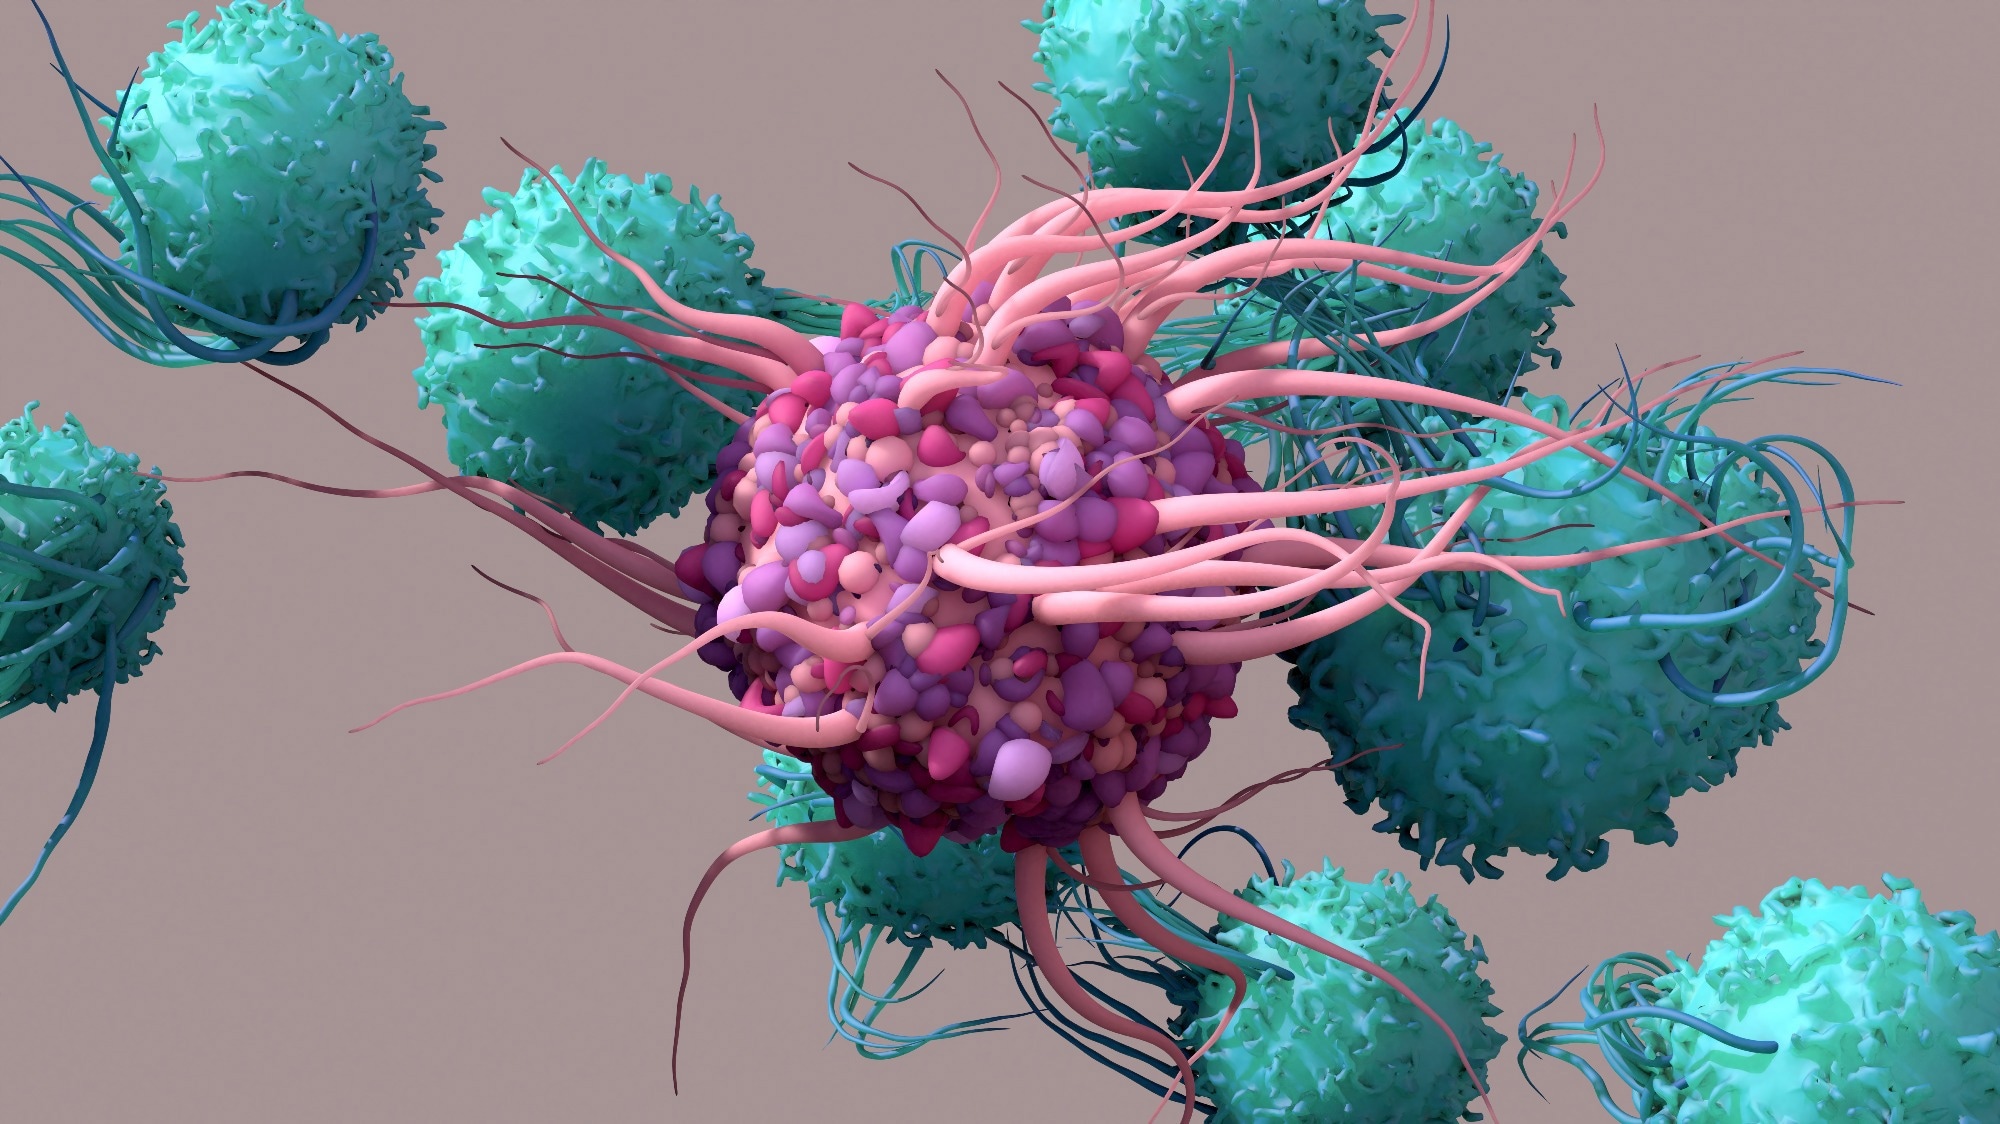 Dendritic Cell activate T cells, trigger immune responses. Image Credit: Design_Cells / Shutterstock